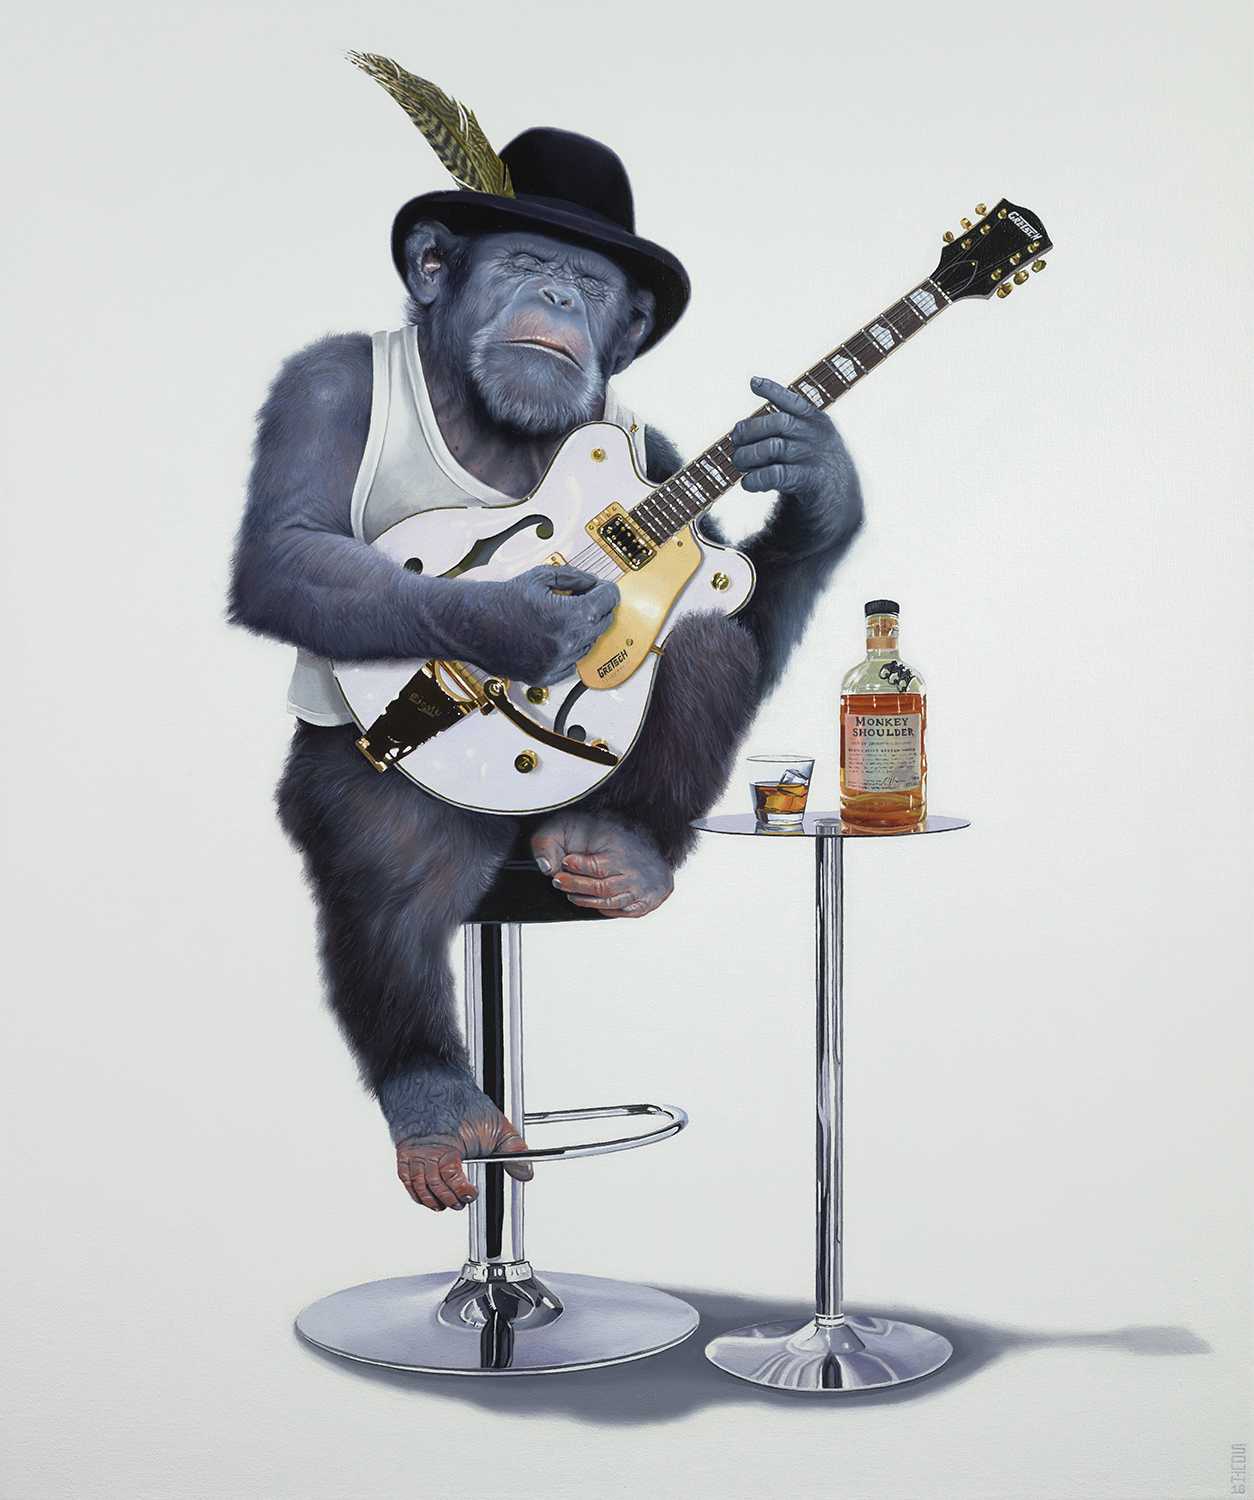 A monkey playing the guitar with a bottle of Monkey Shoulder next to him - Tony South - Too Much Monkey Business